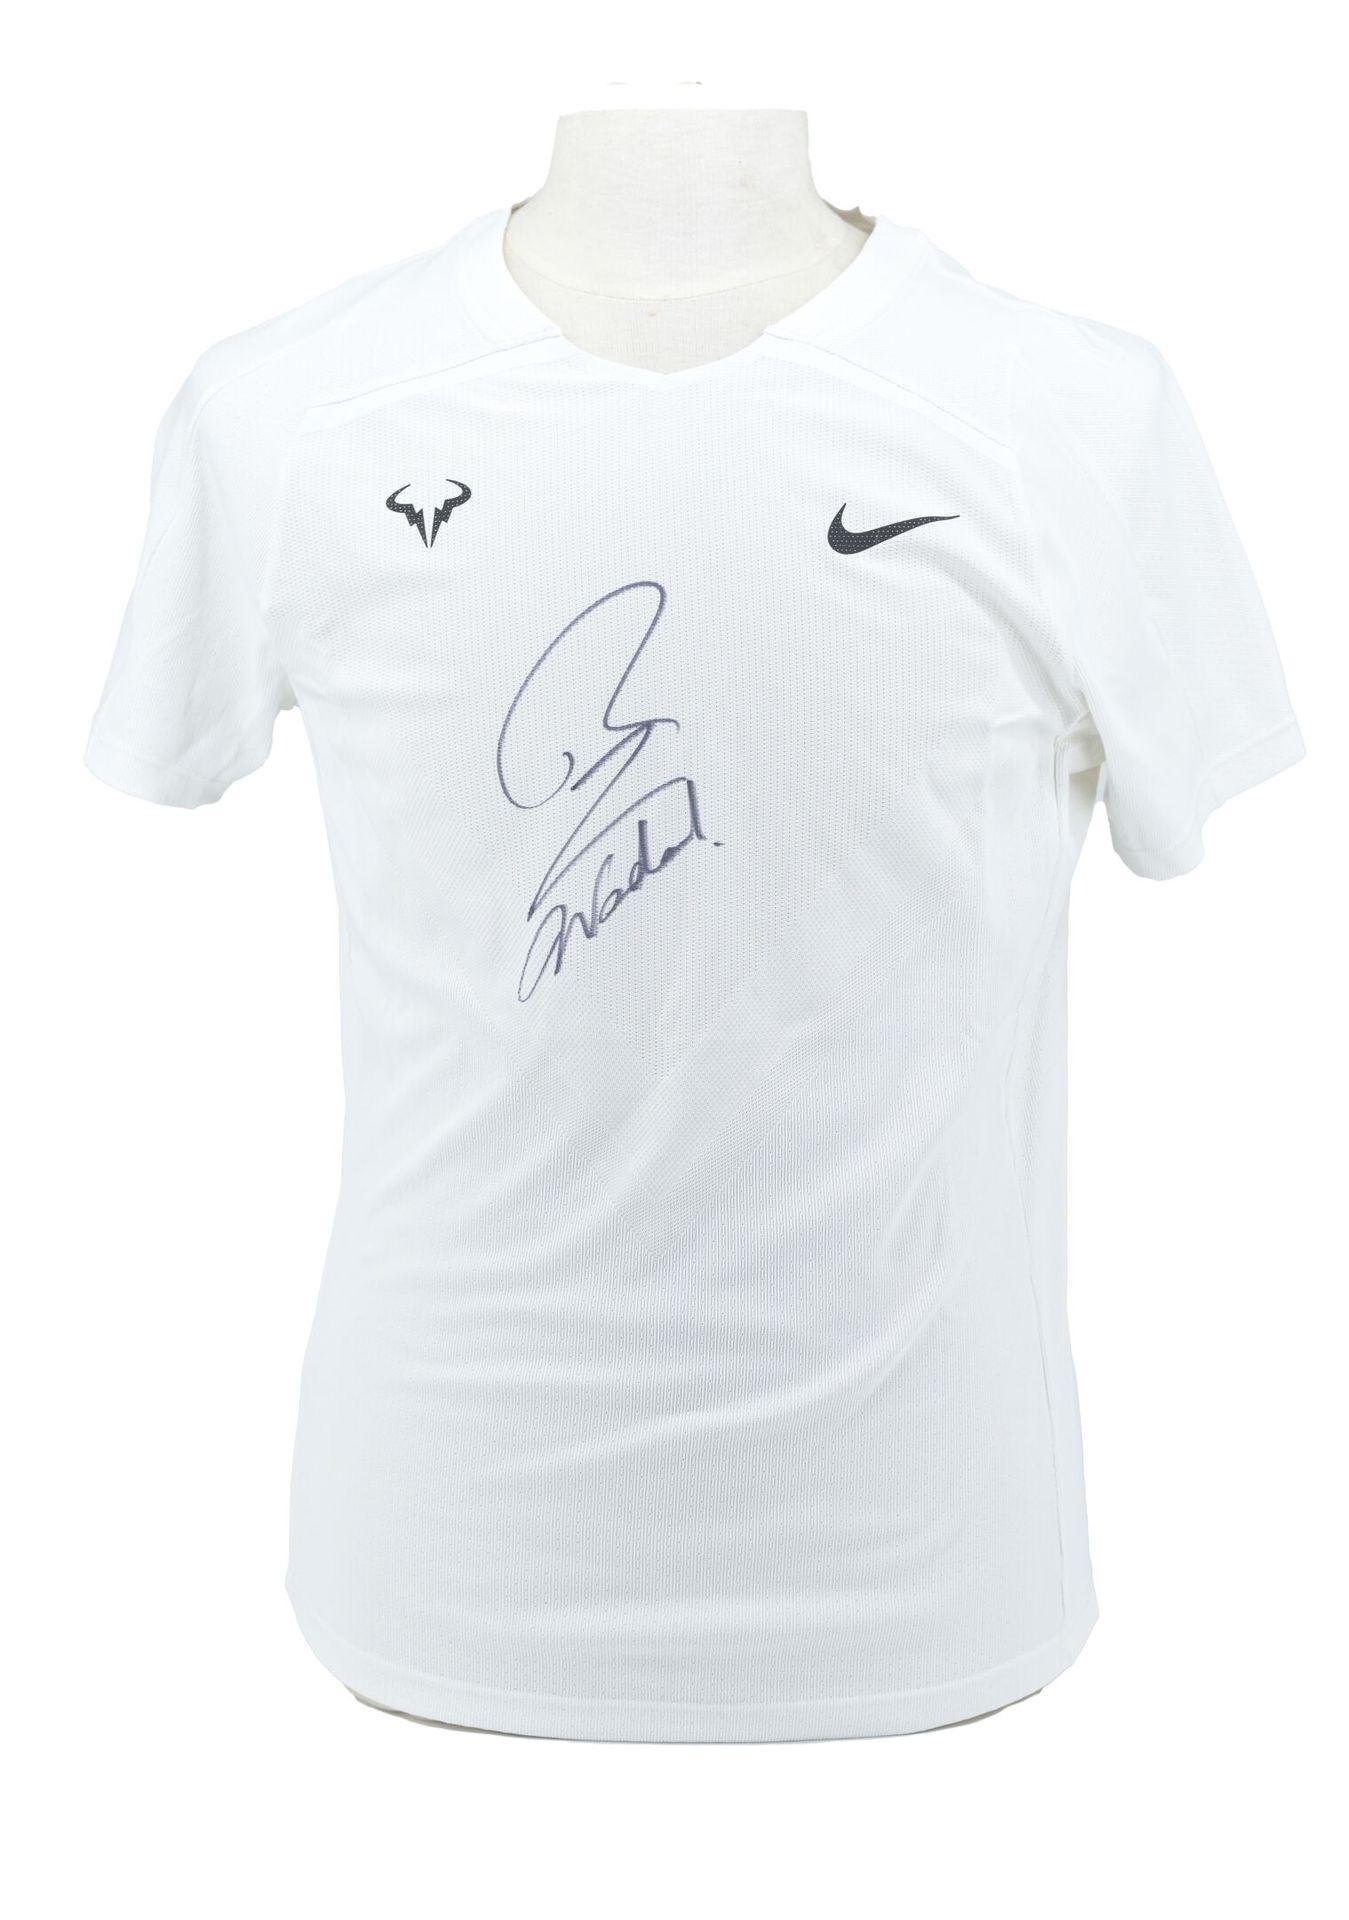 Null Nike jersey signed by Rafael Nadal - 2023

Note: 
- Jersey offered by Rafae&hellip;